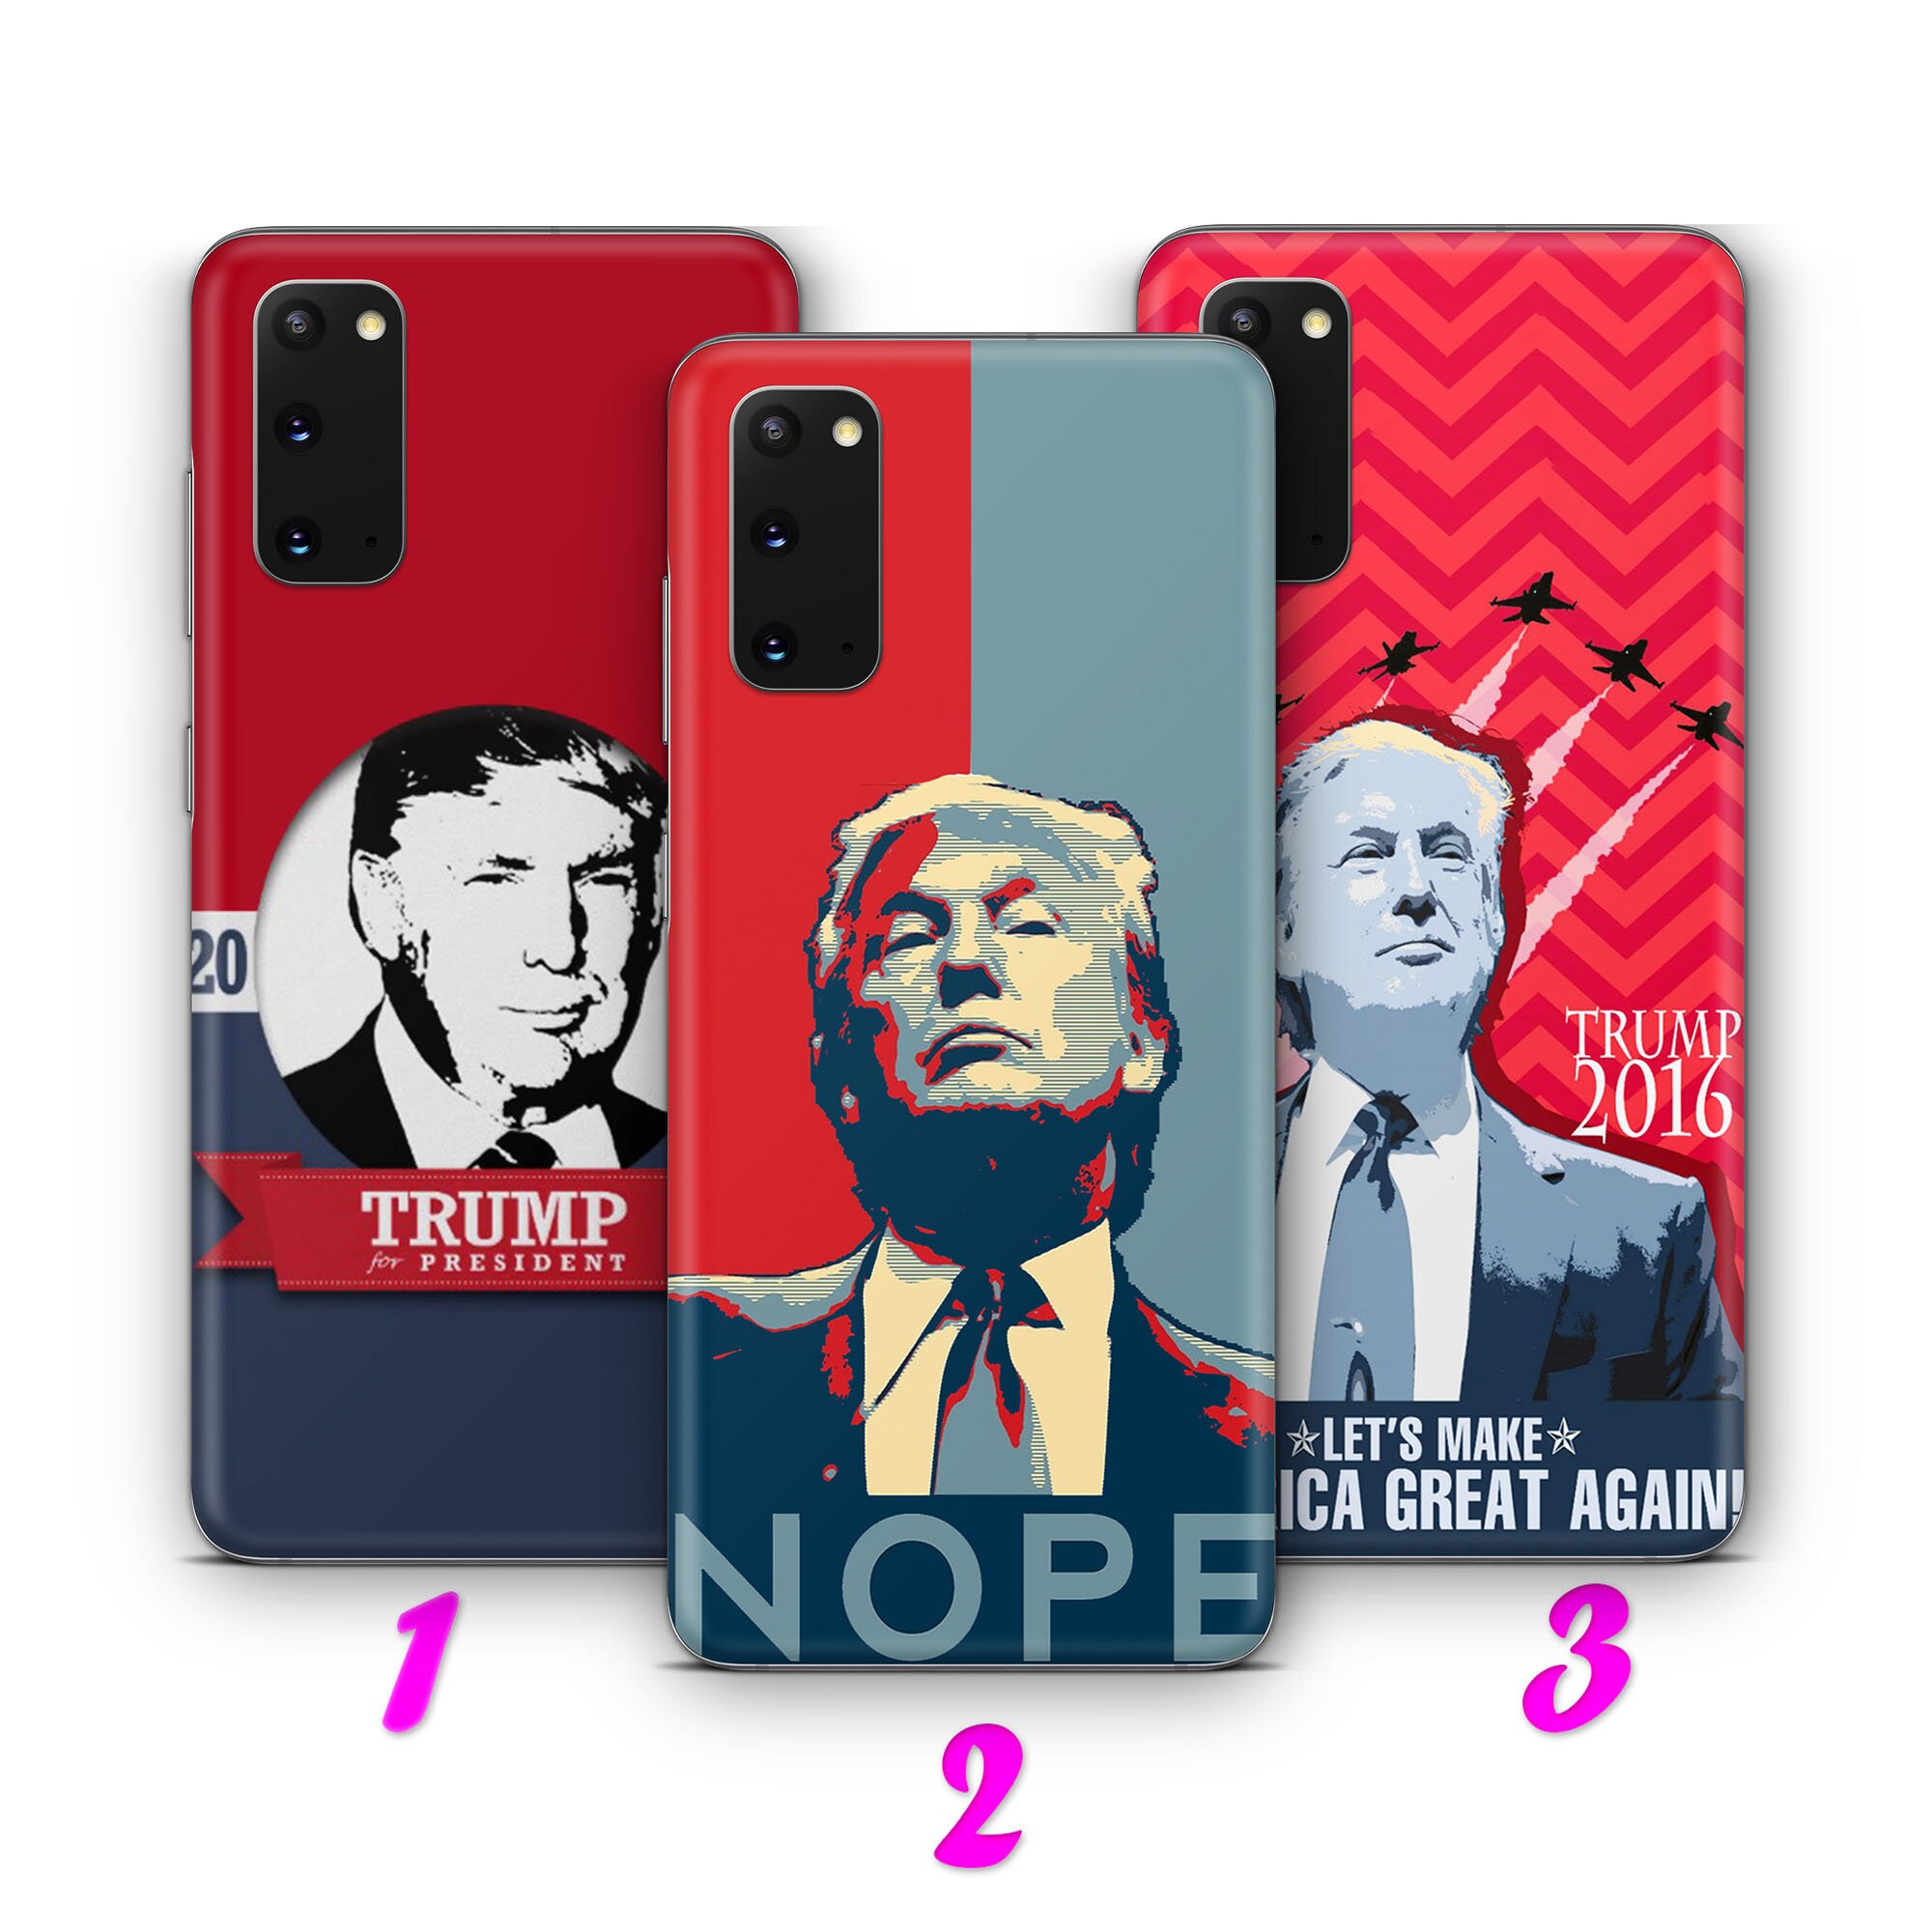 Inspired by Donald trump phone case Donald trump iPhone case 7 plus X XR XS Max 8 6 6s 5 5s se Donald trump Samsung galaxy case s9 s9 Plus note 8 s8 s7 edge s6 s5 s4 note 9 gift art cover 